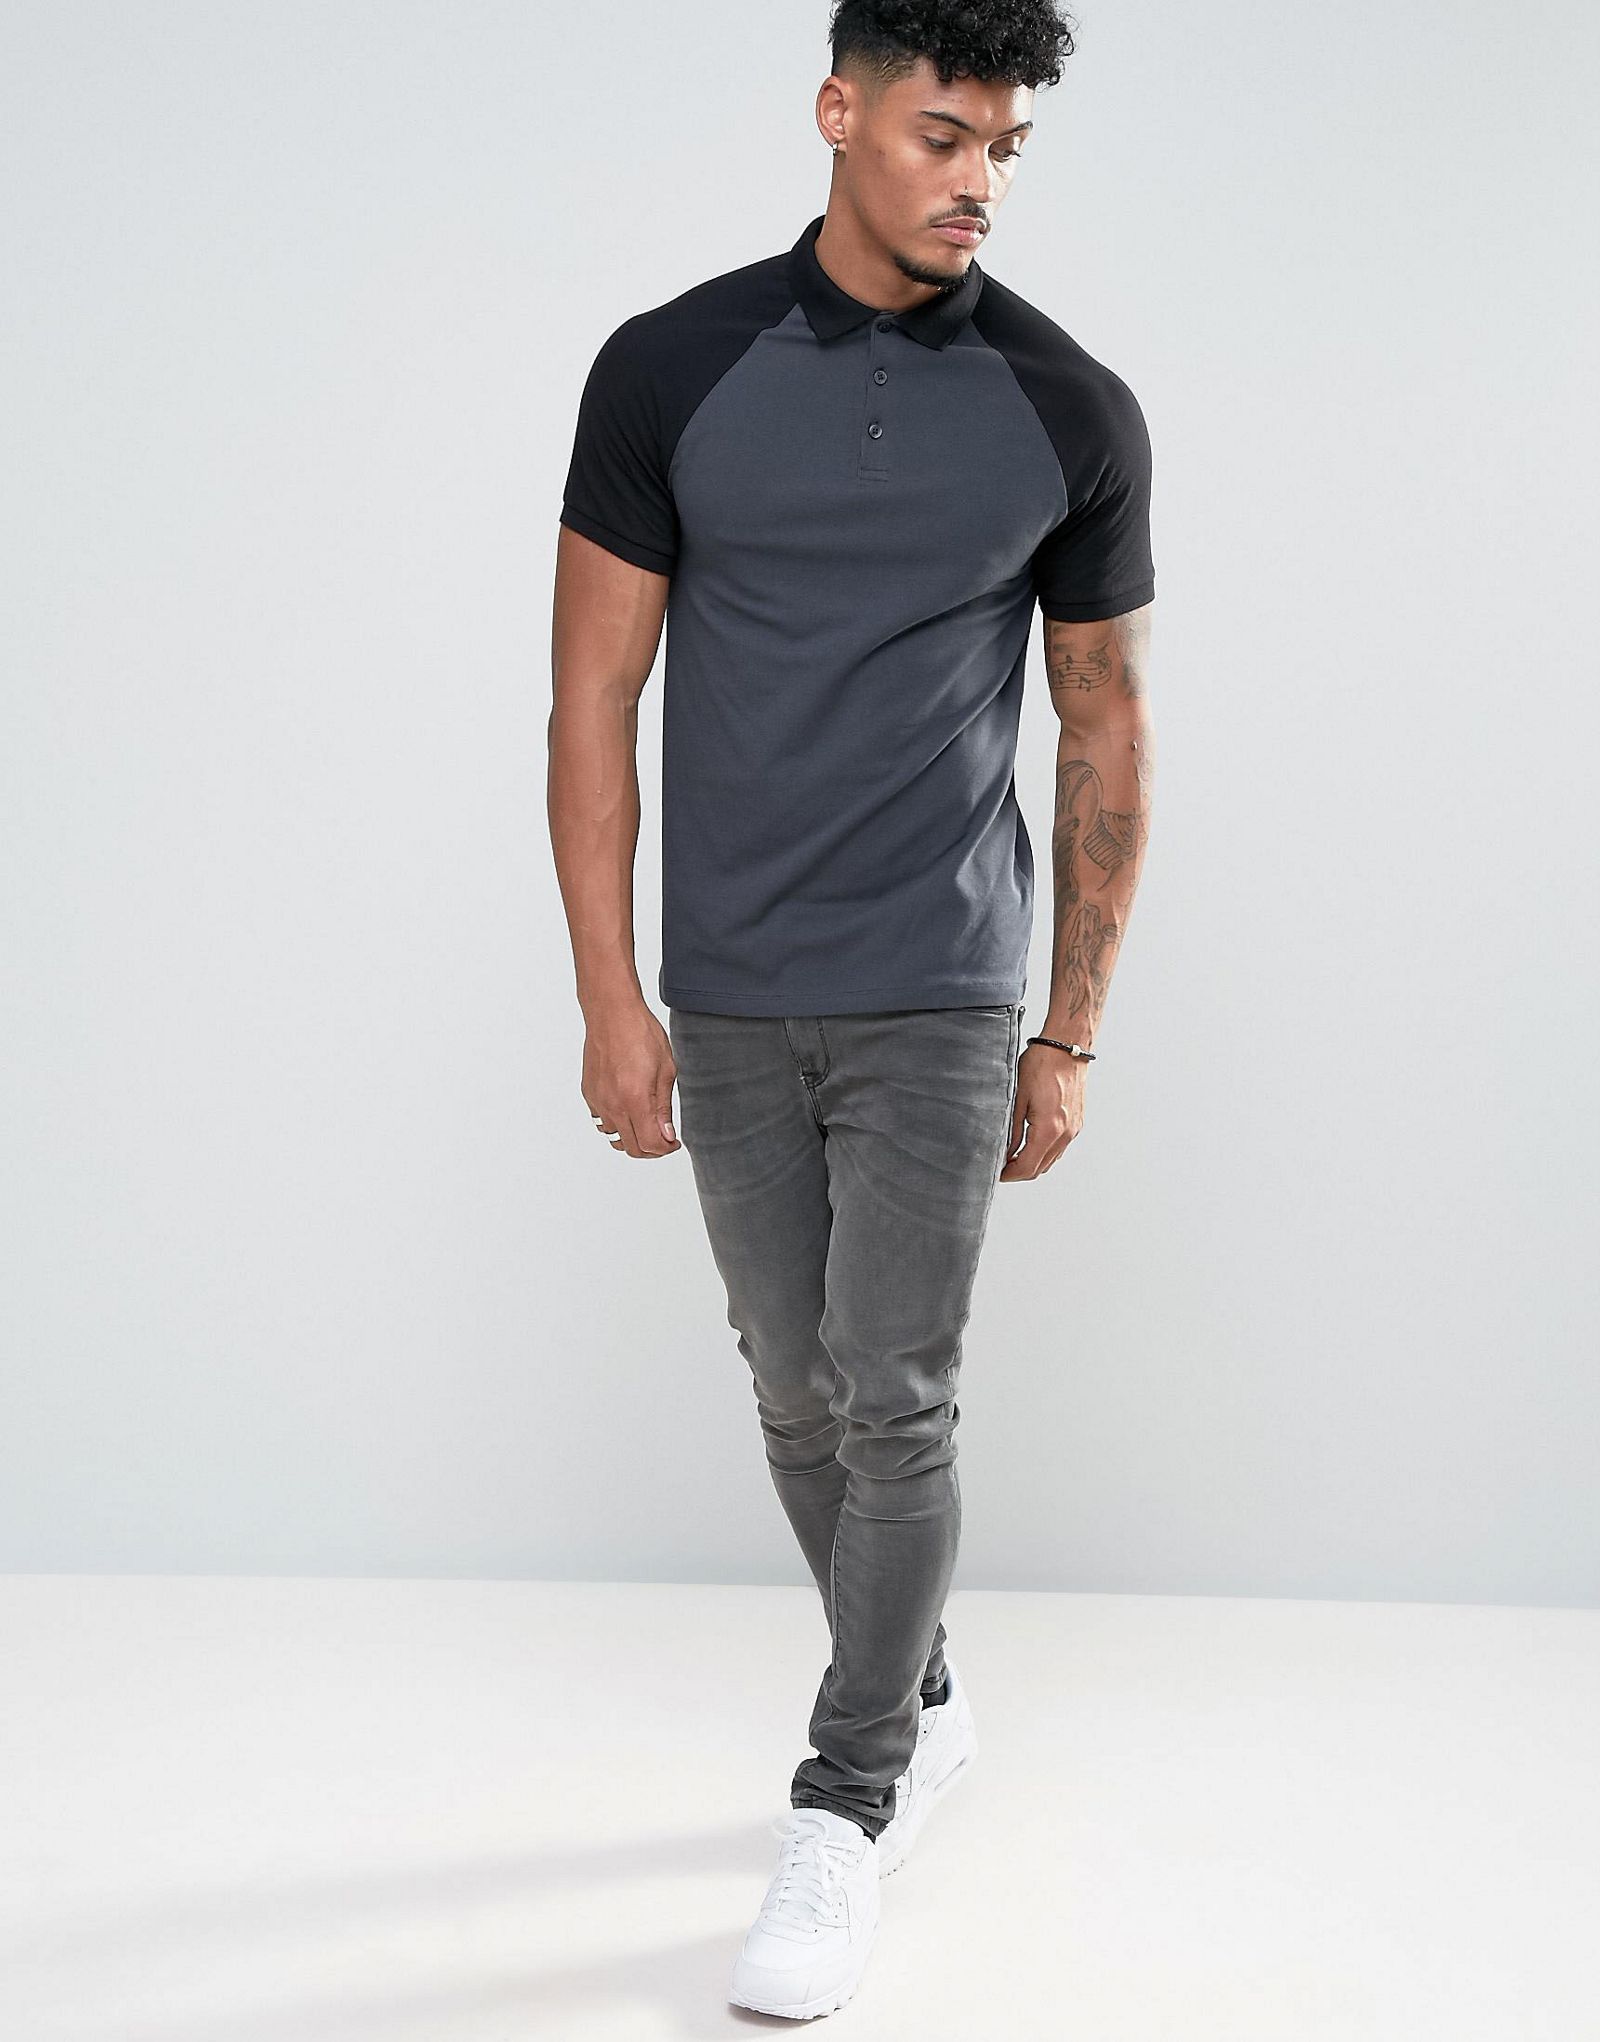 ASOS Muscle Polo With Contrast Raglan Sleeves In Grey/Black